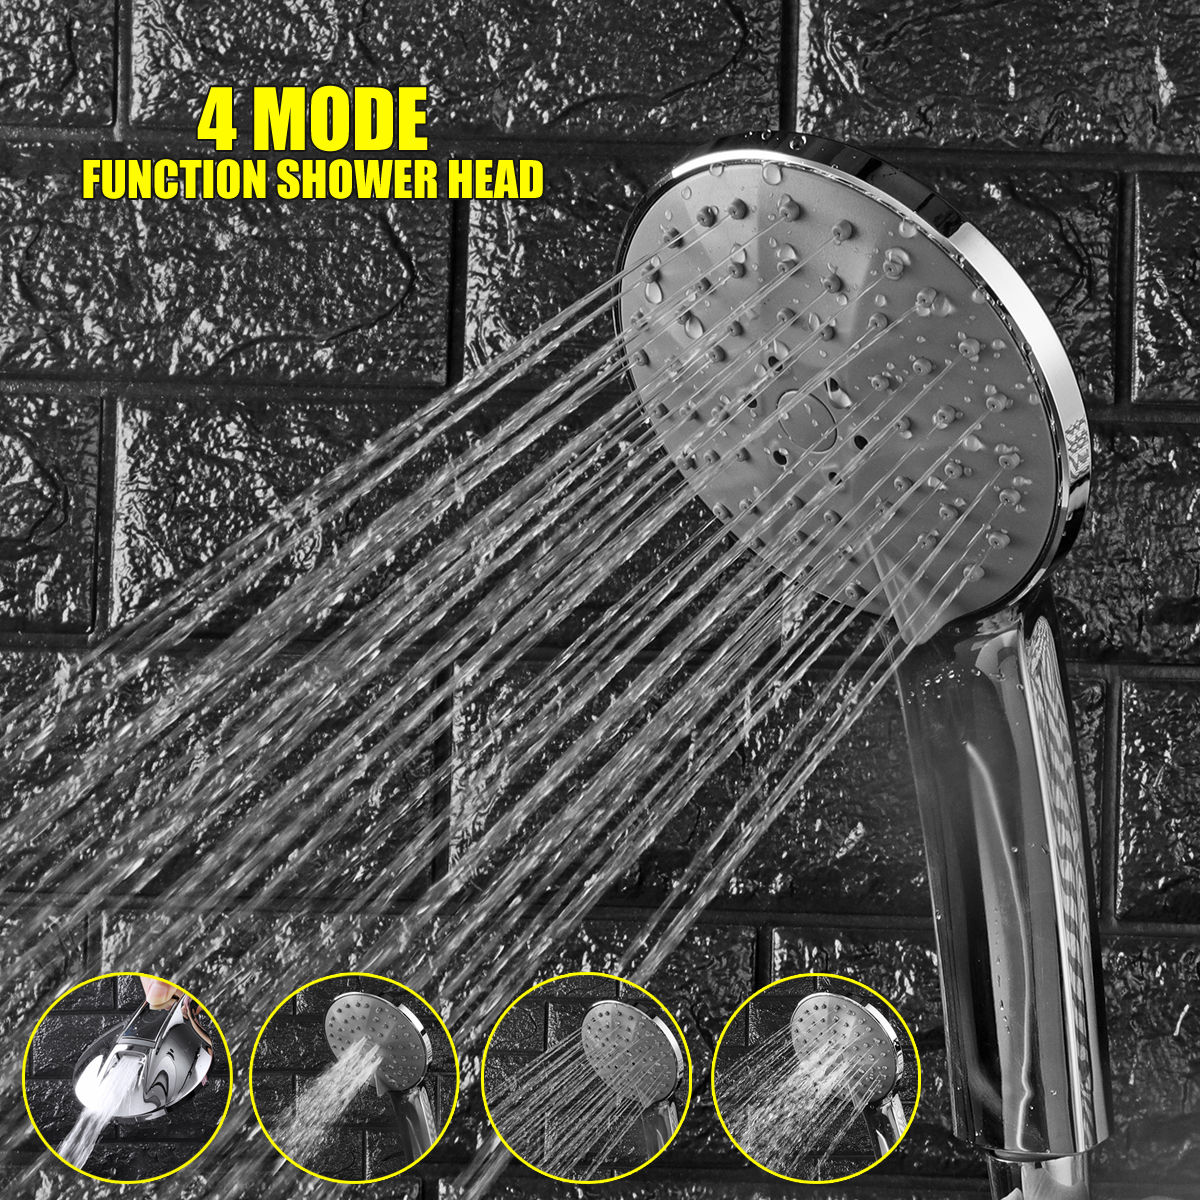 Multi-Function-Bathroom-Shower-Head-4-Mode-Spray-With-Bidet-Function-Wall-Mounted-1398094